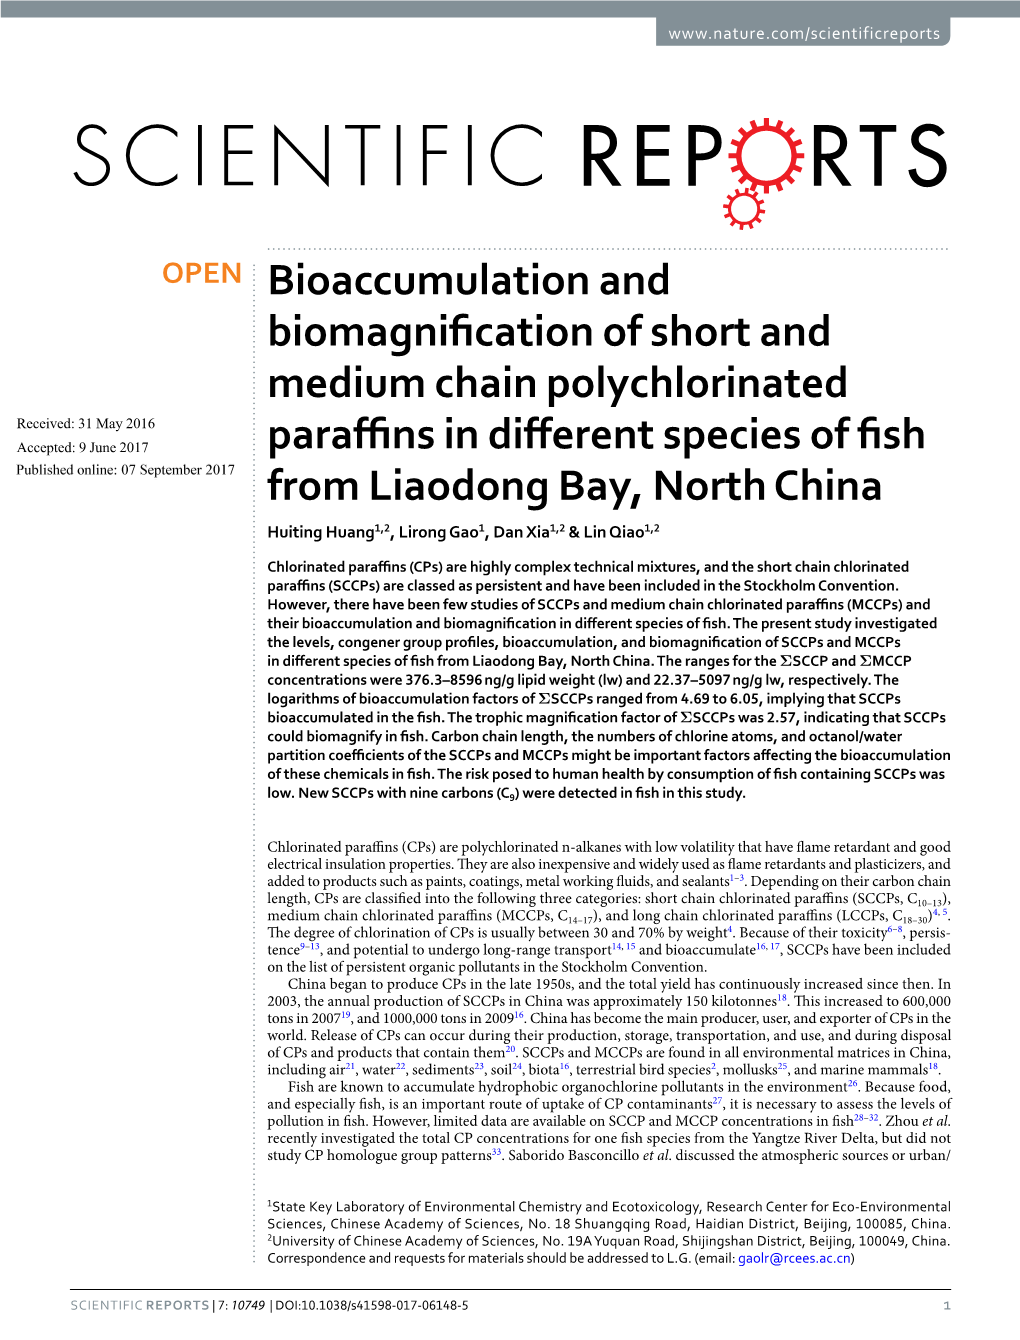 Bioaccumulation and Biomagnification of Short and Medium Chain